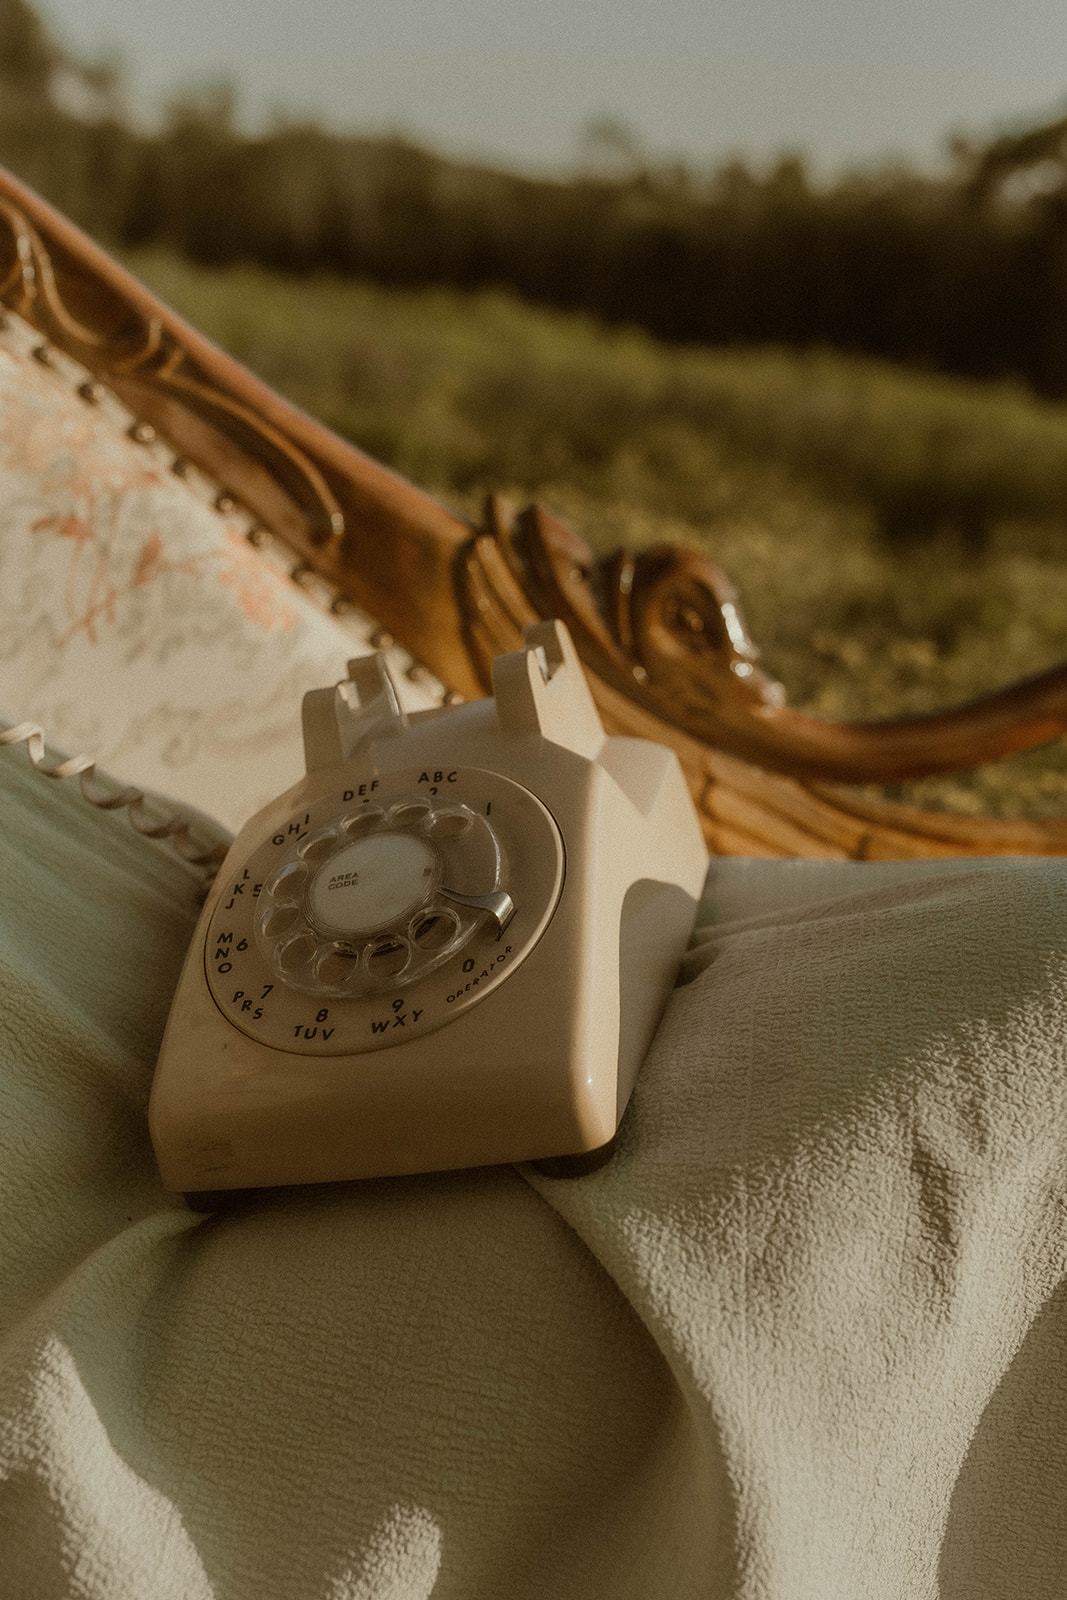 Detail photo of a rotary phone and vintage chaise used during a photoshoot in a wildflower field